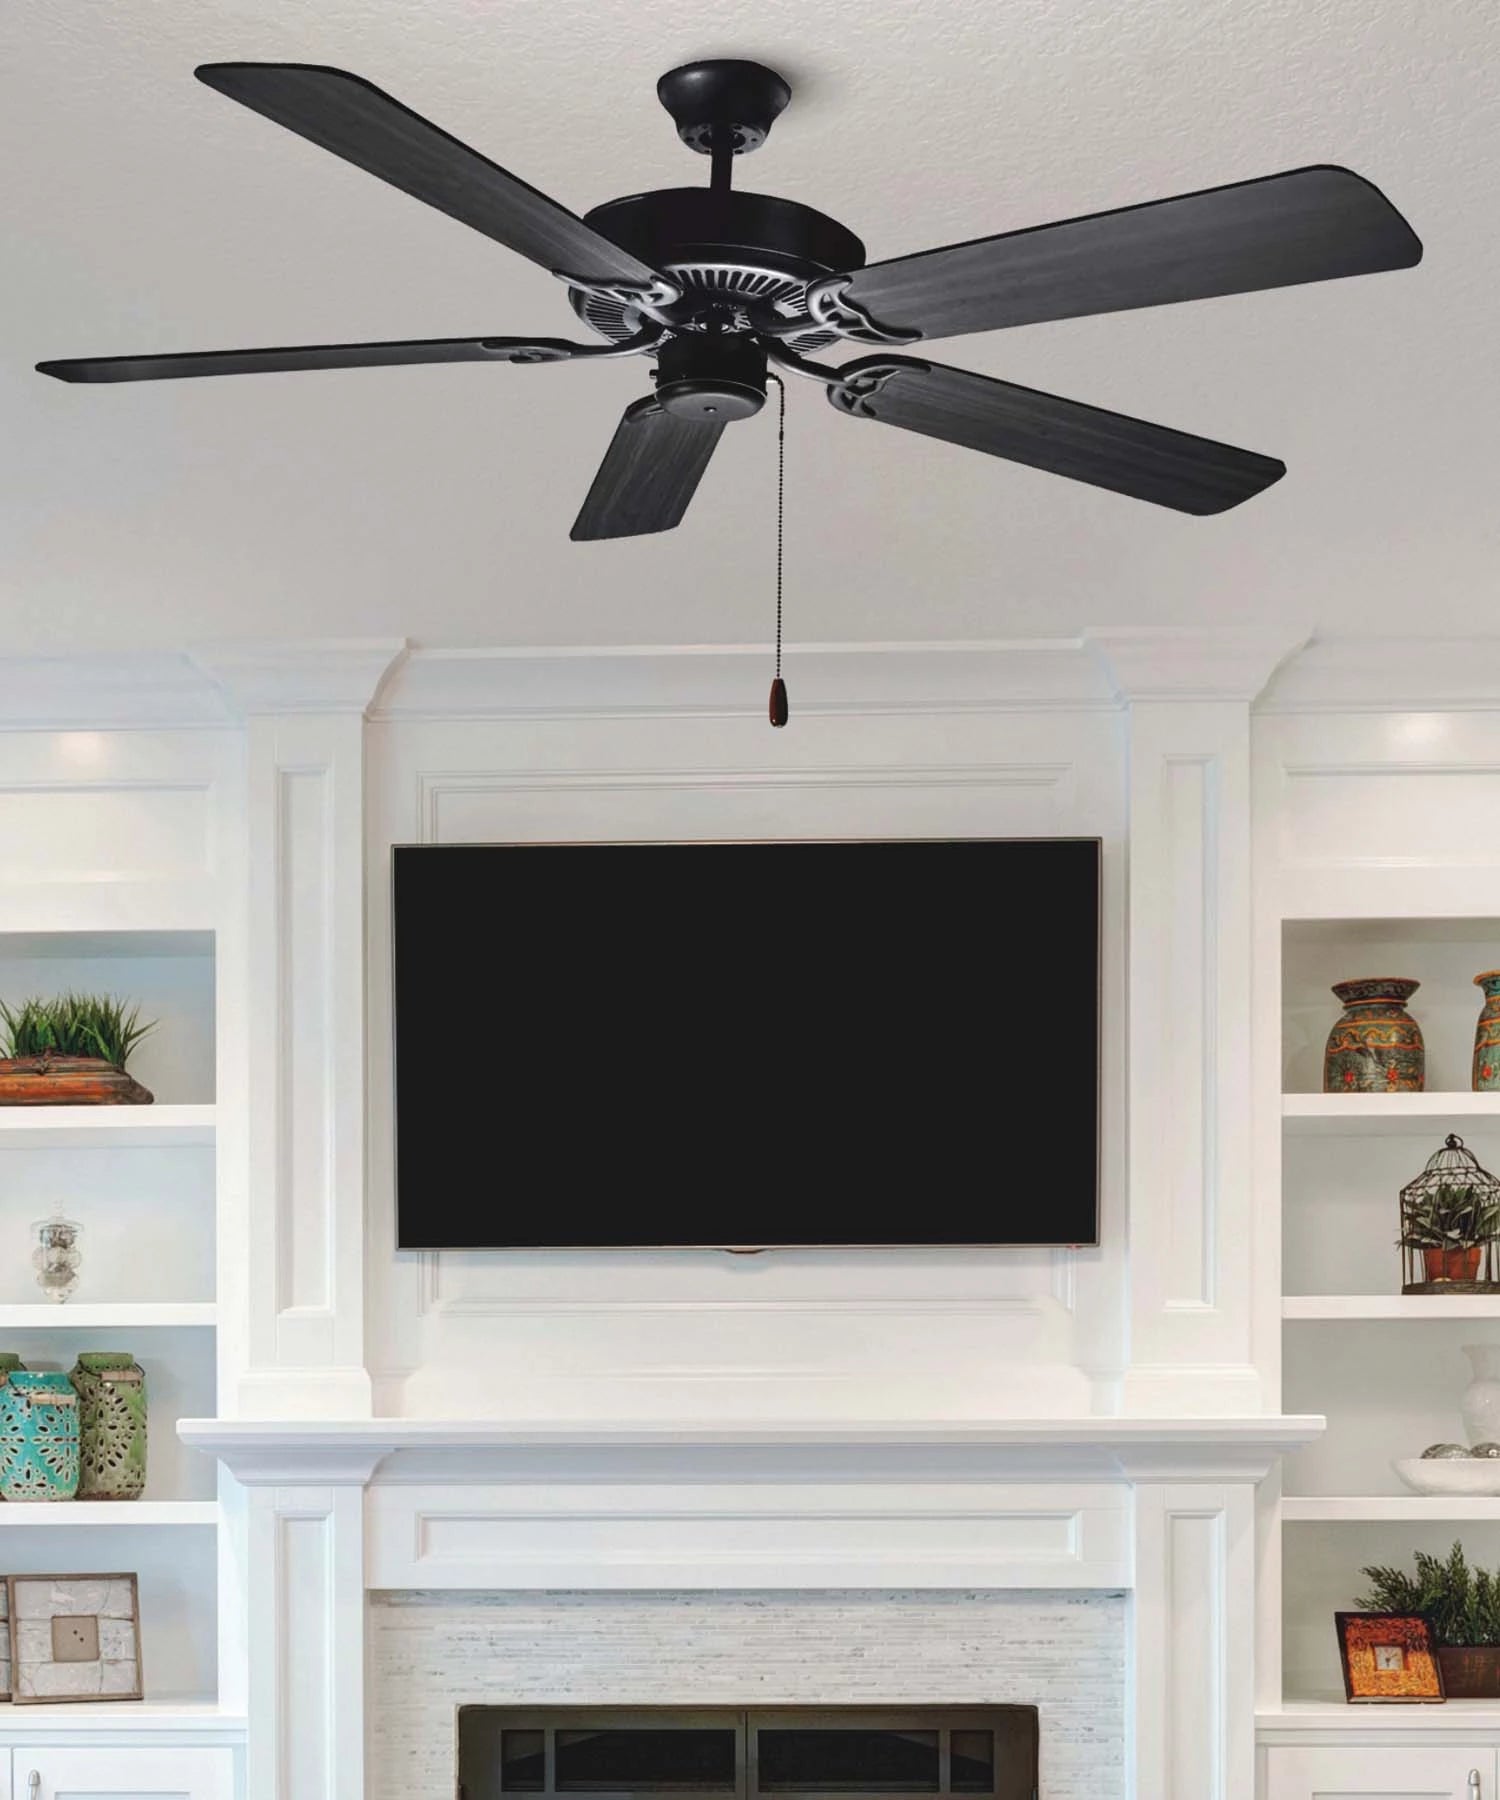 Maxim Ceiling Fans - Bees Lighting